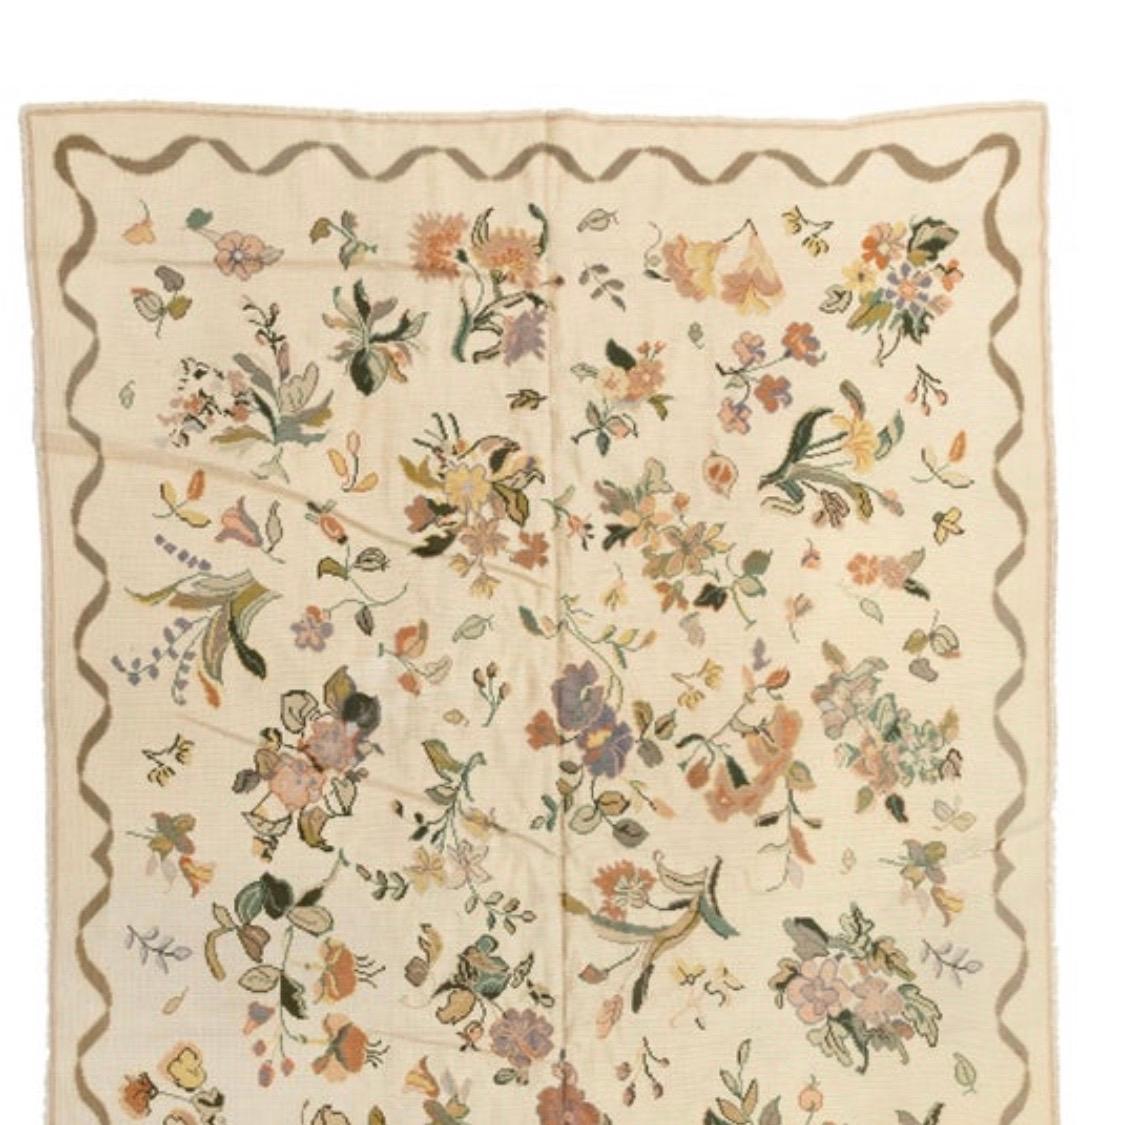 Mid-20th Century Antique Ivory Portuguese Needlepoint Rug with Flowers, circa 1930-1940s For Sale